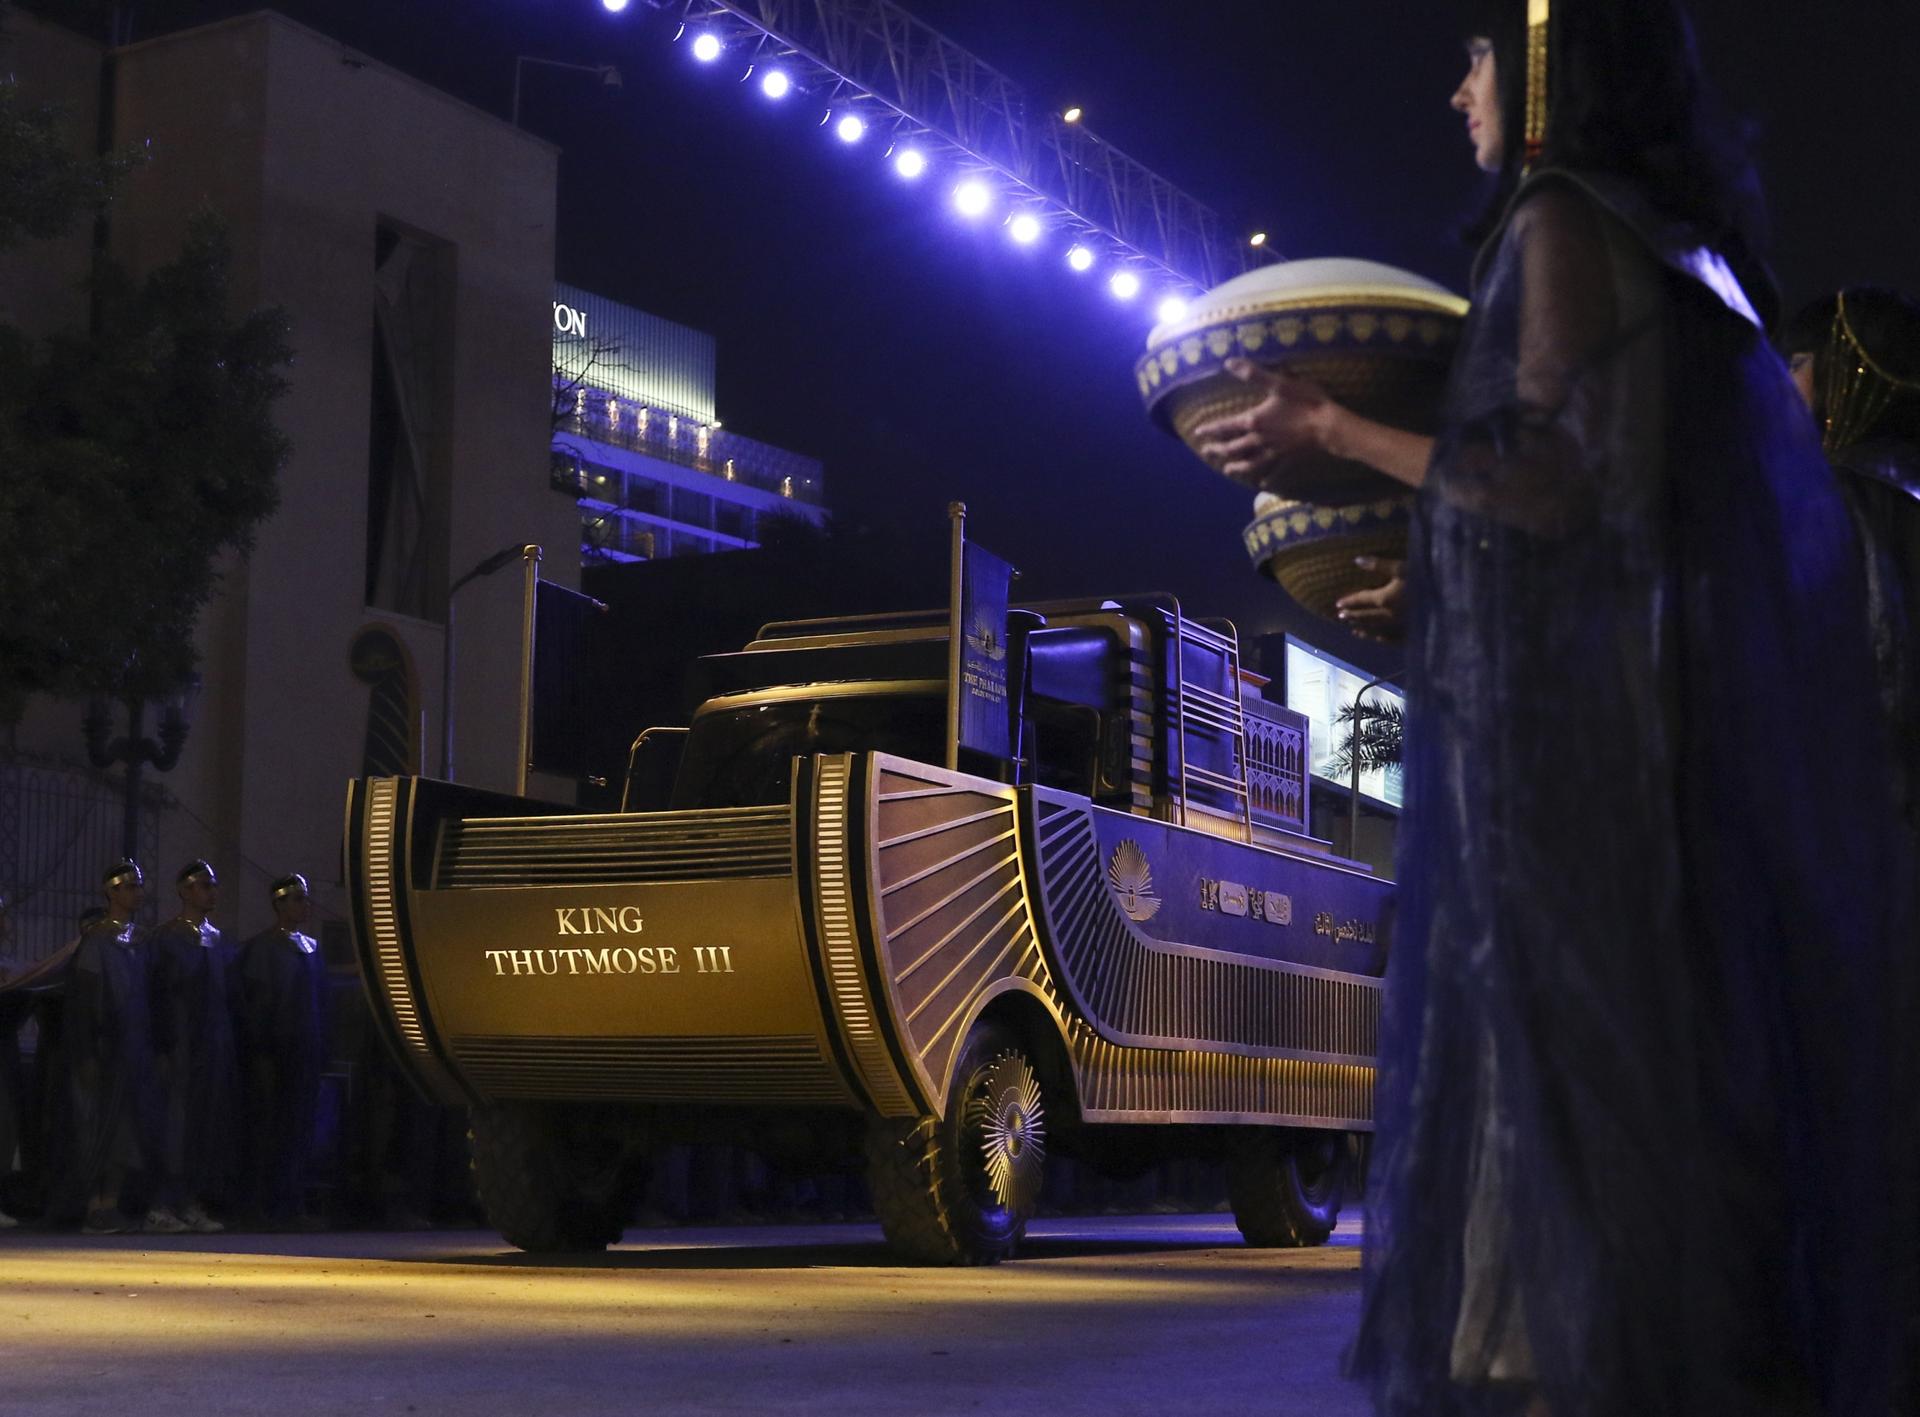 A convoy of vehicles transporting royal mummies is seen in Cairo, April 3, 2021. Egypt held a parade celebrating the transport of 22 of its prized royal mummies from the Egyptian Museum to the newly opened National Museum of Egyptian Civilization.